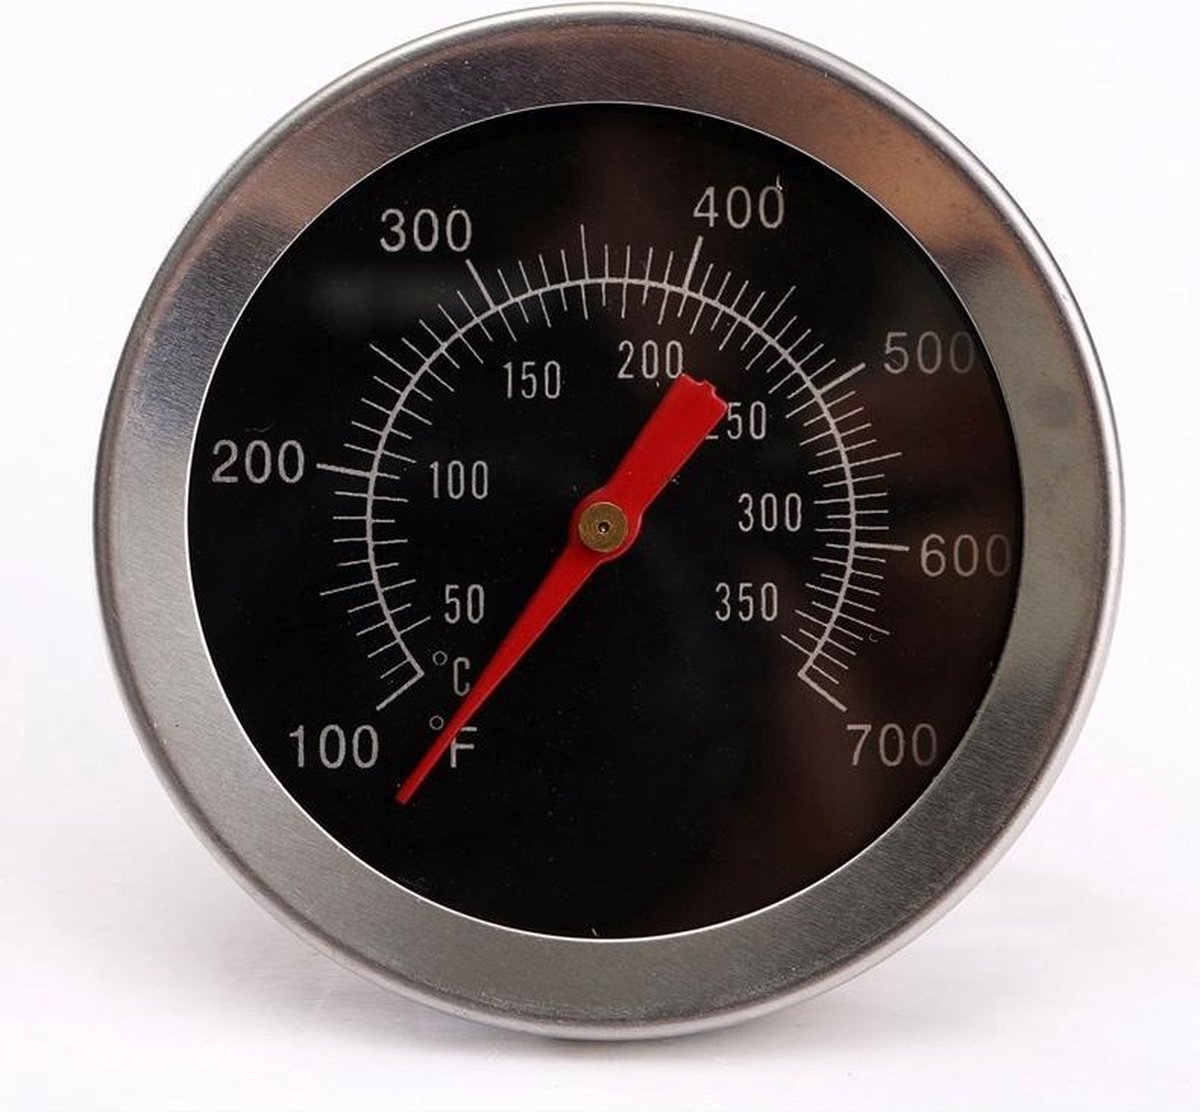 RVS BBQ grill Thermometer Deksel thermometer Inbouw | bol.com